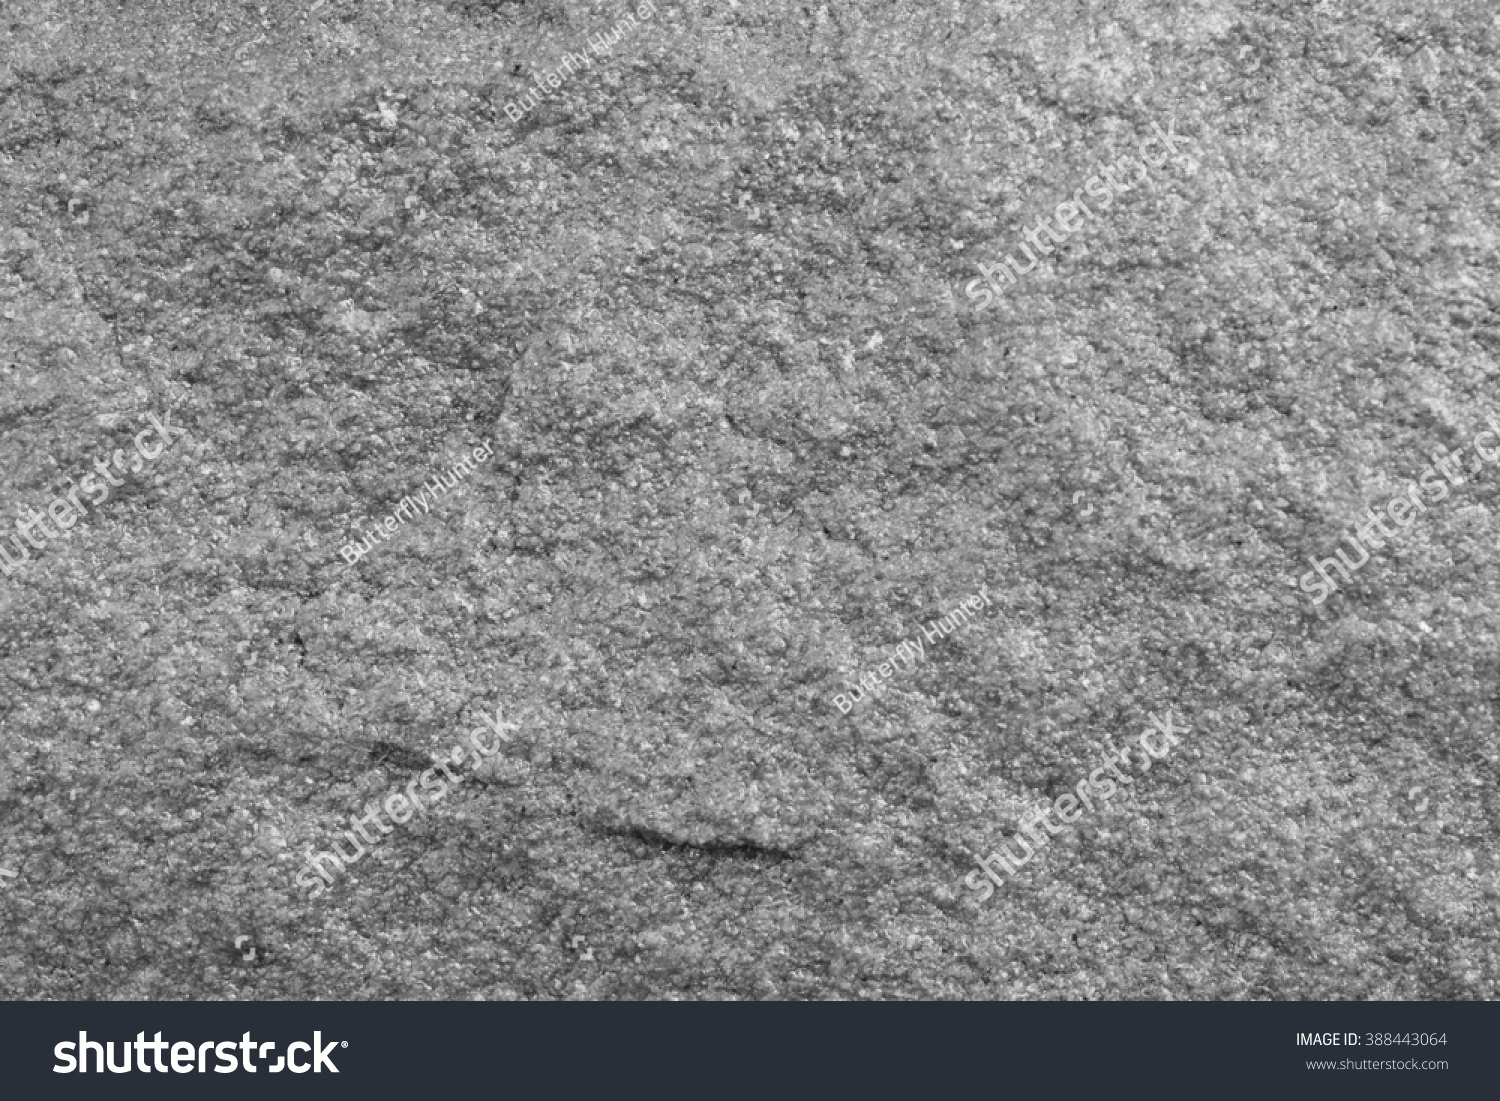 stone texture or background #388443064